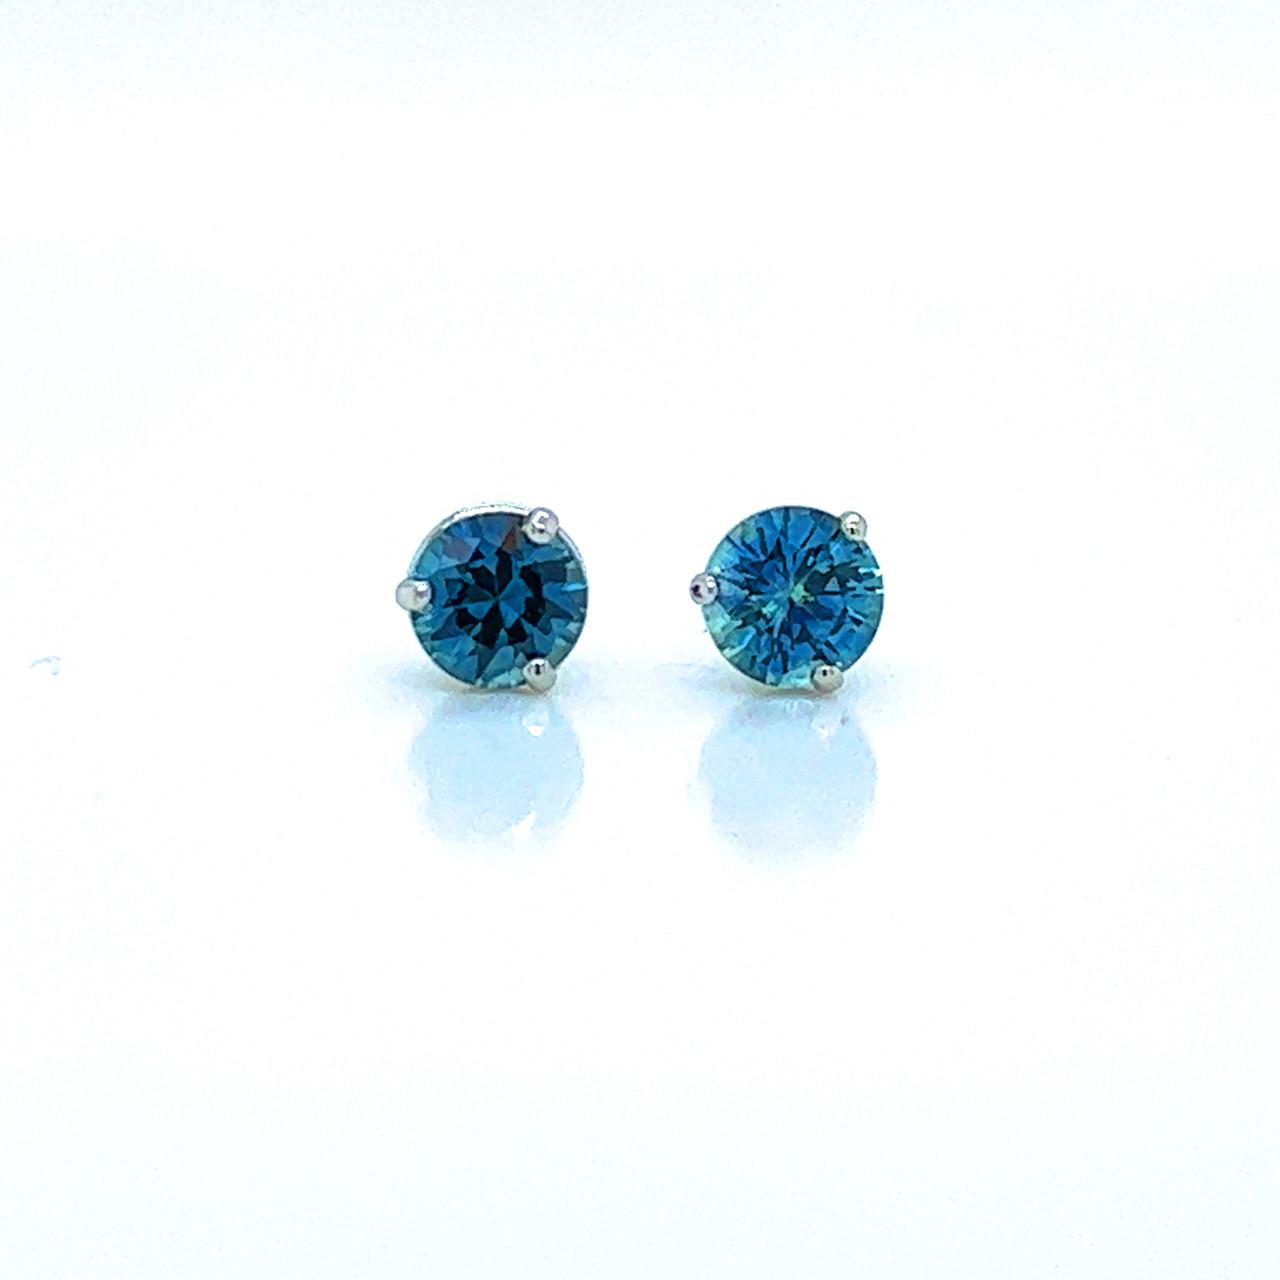 Quality Gold 14k White Gold 5mm Bezel Sapphire Stud Earrings XBE261 -  Getzow Jewelers